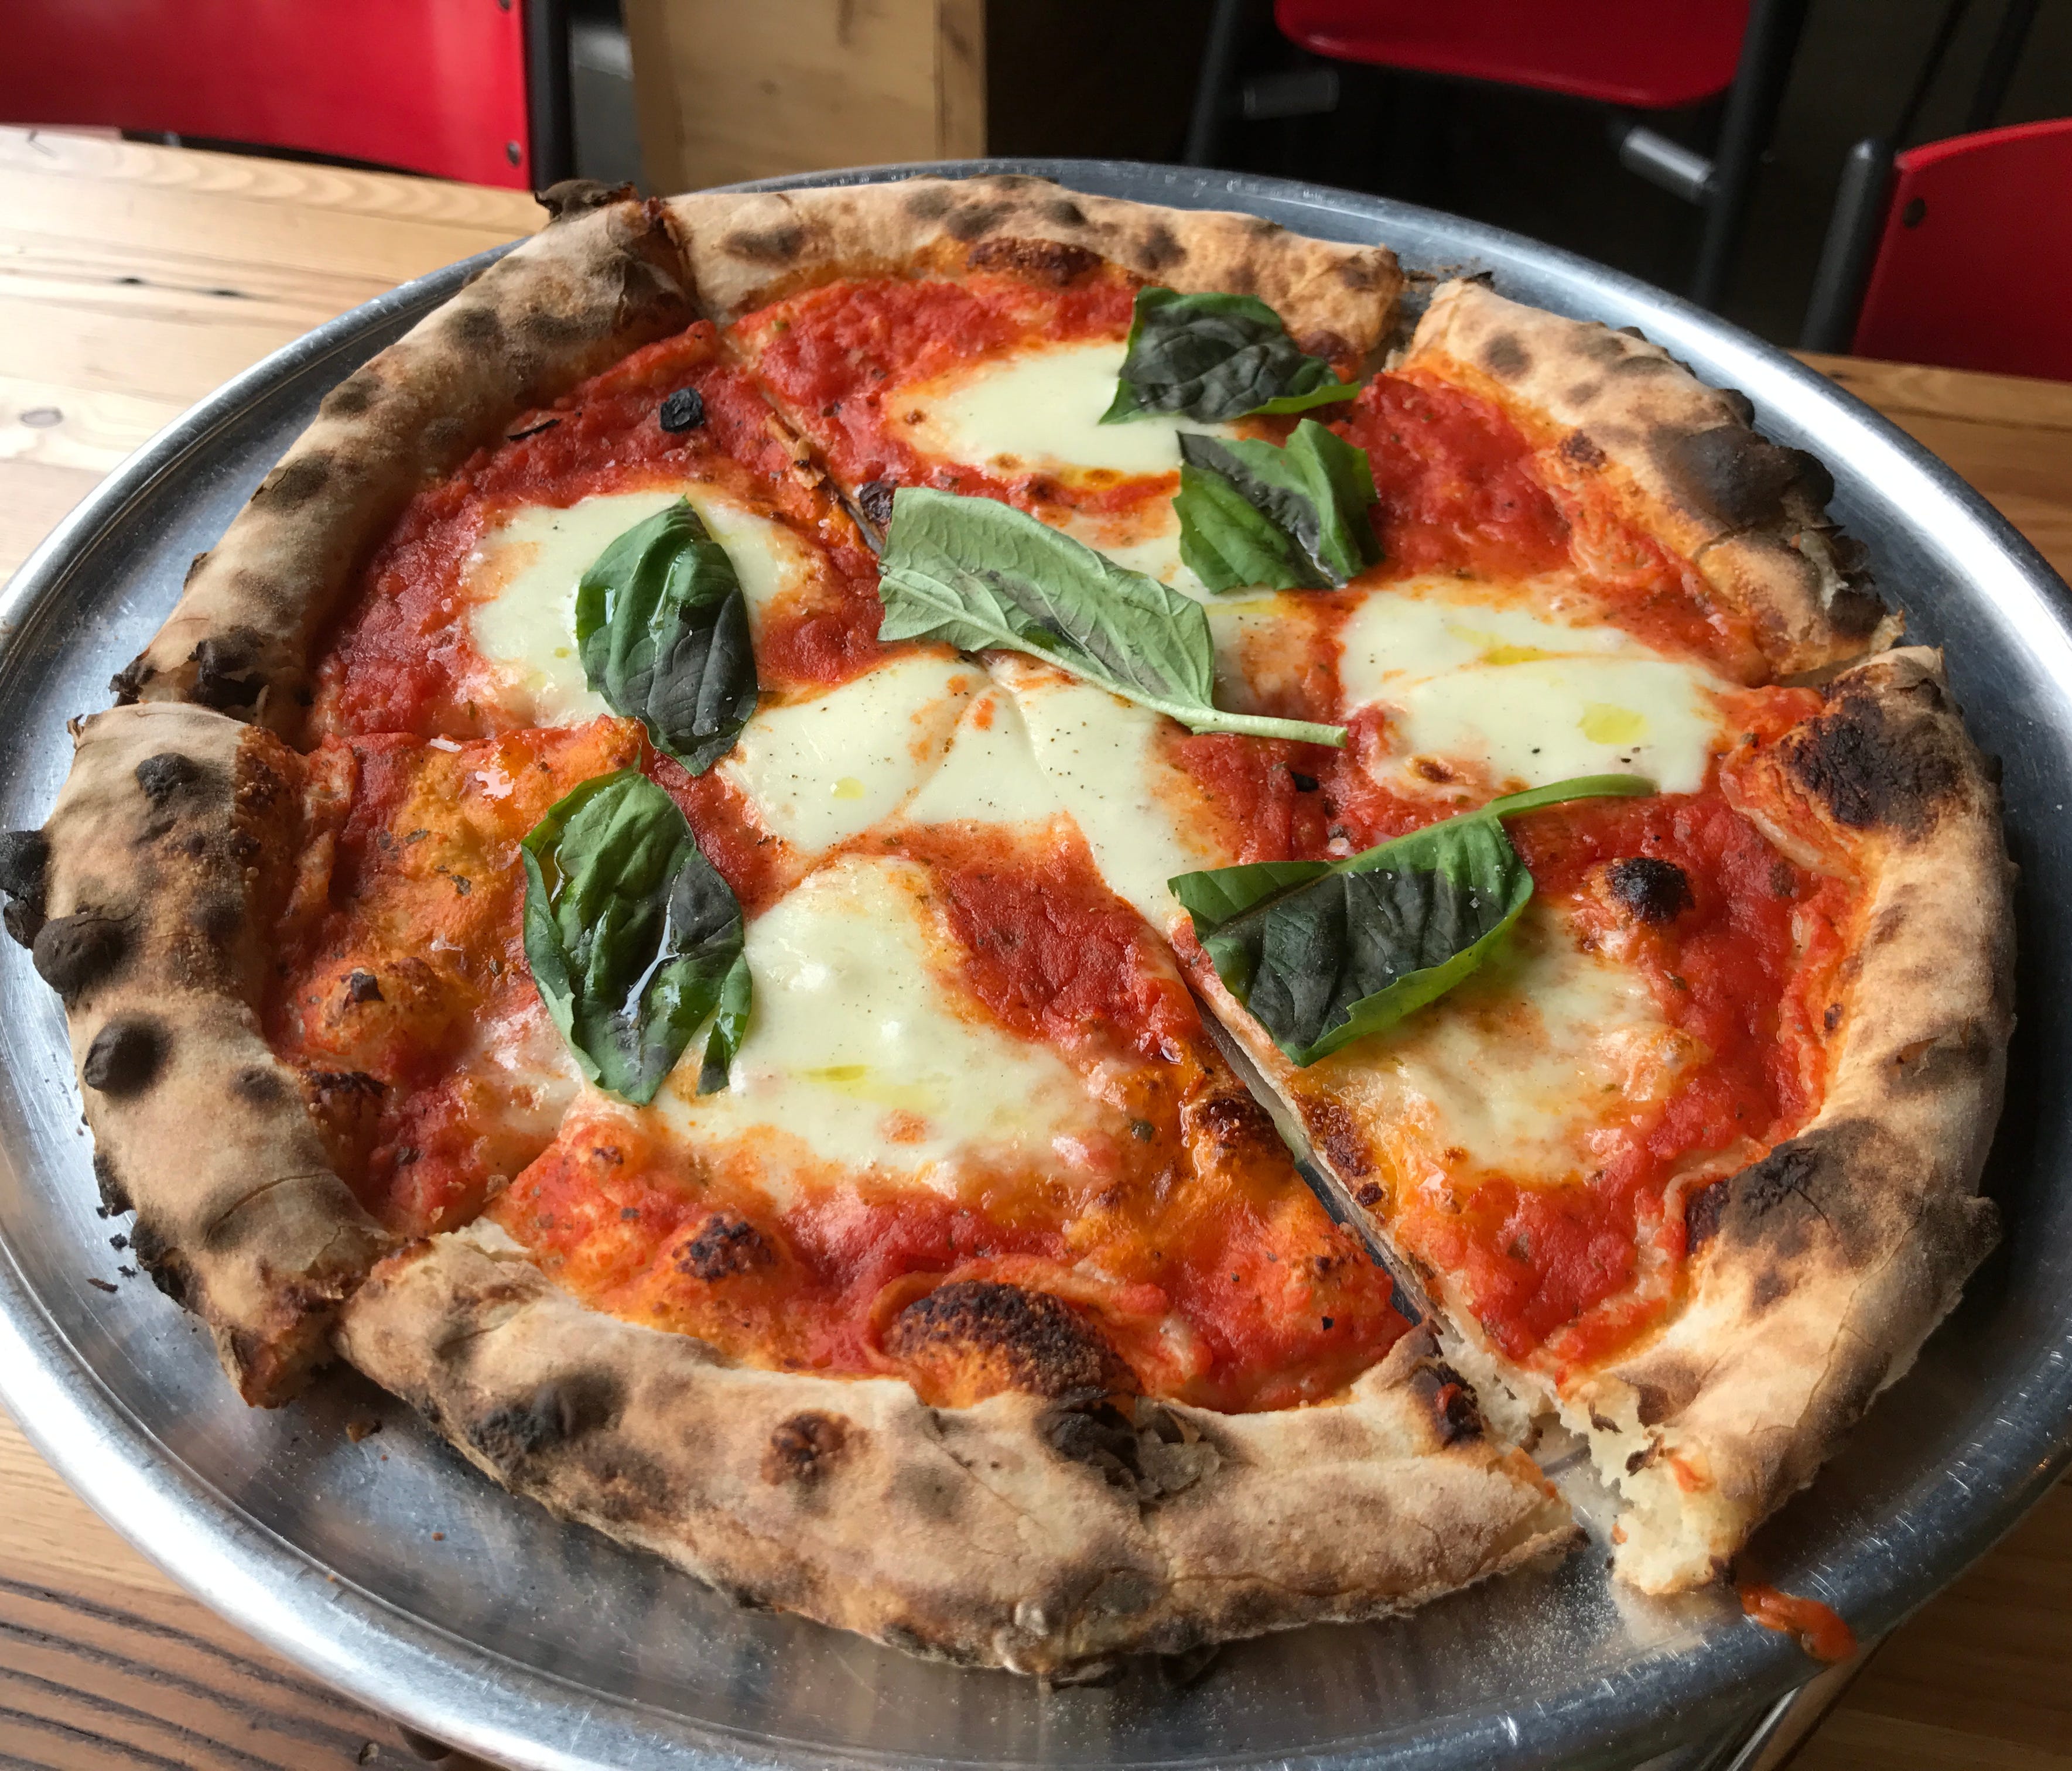 Excellent crust that captures the smokiness of the wood burning oven is the base that these great pizzas are all built upon. This is the classic Margherita, with fresh mozzarella, basil and tomato sauce.